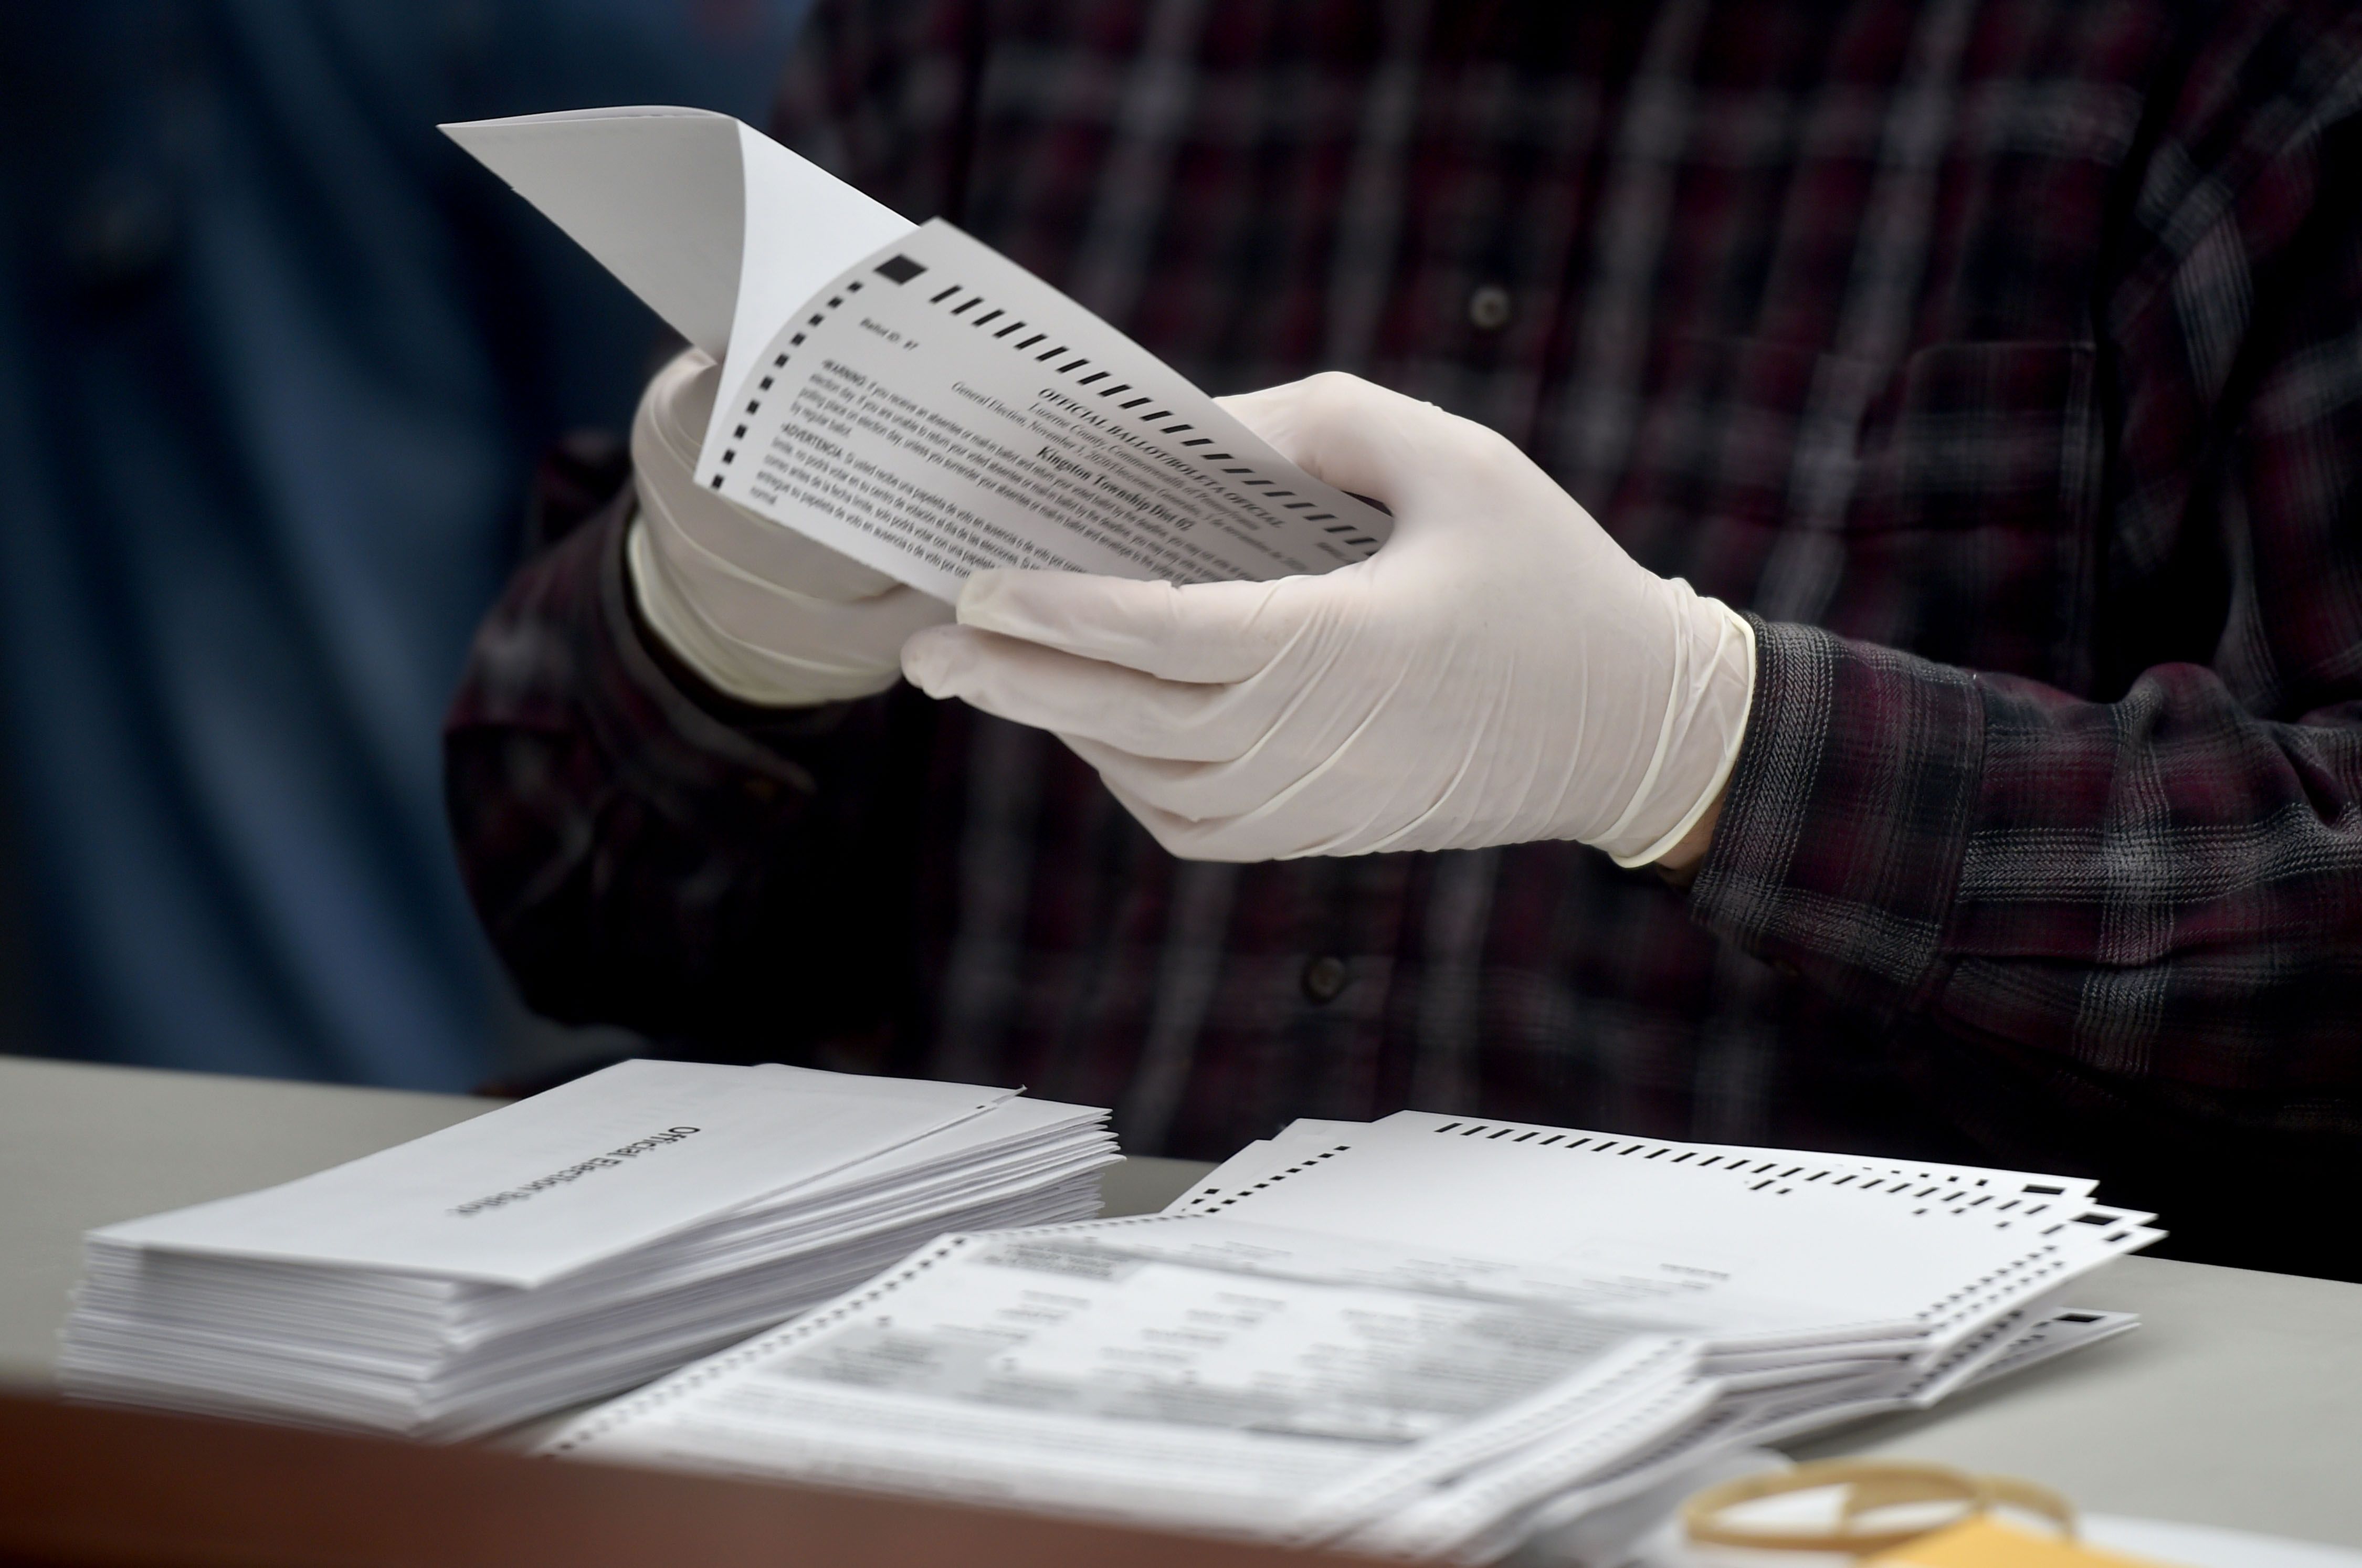 An election worker opens a mail-in ballot in Pennsylvania on Tuesday. Photo: Aimee Dilger/SOPA Images/LightRocket via Getty Images